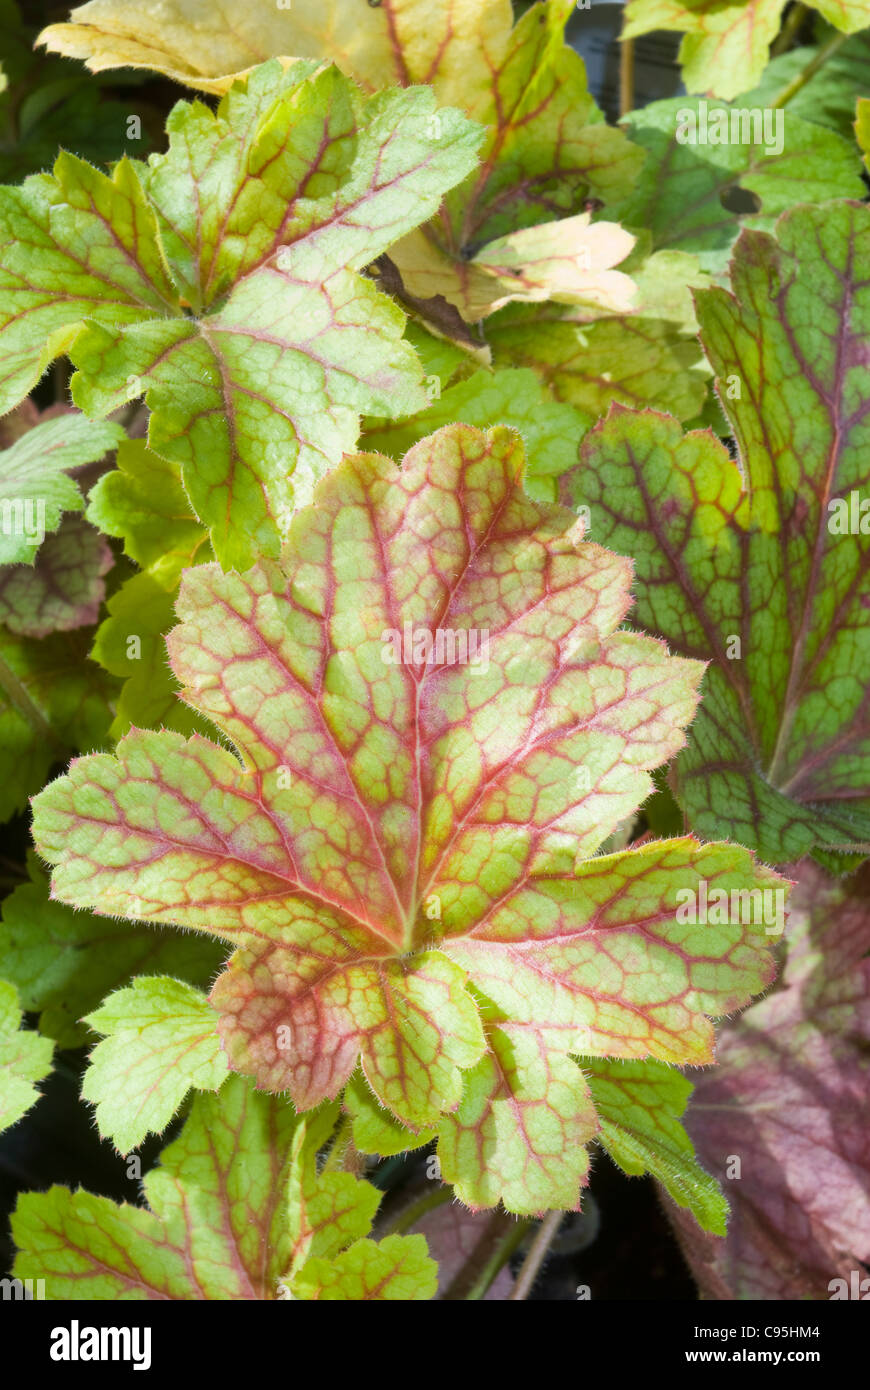 Heuchera 'Electric Lime' in autumn fall, perennial foliage plant with prominent red veins & green leaves for shade garden Stock Photo